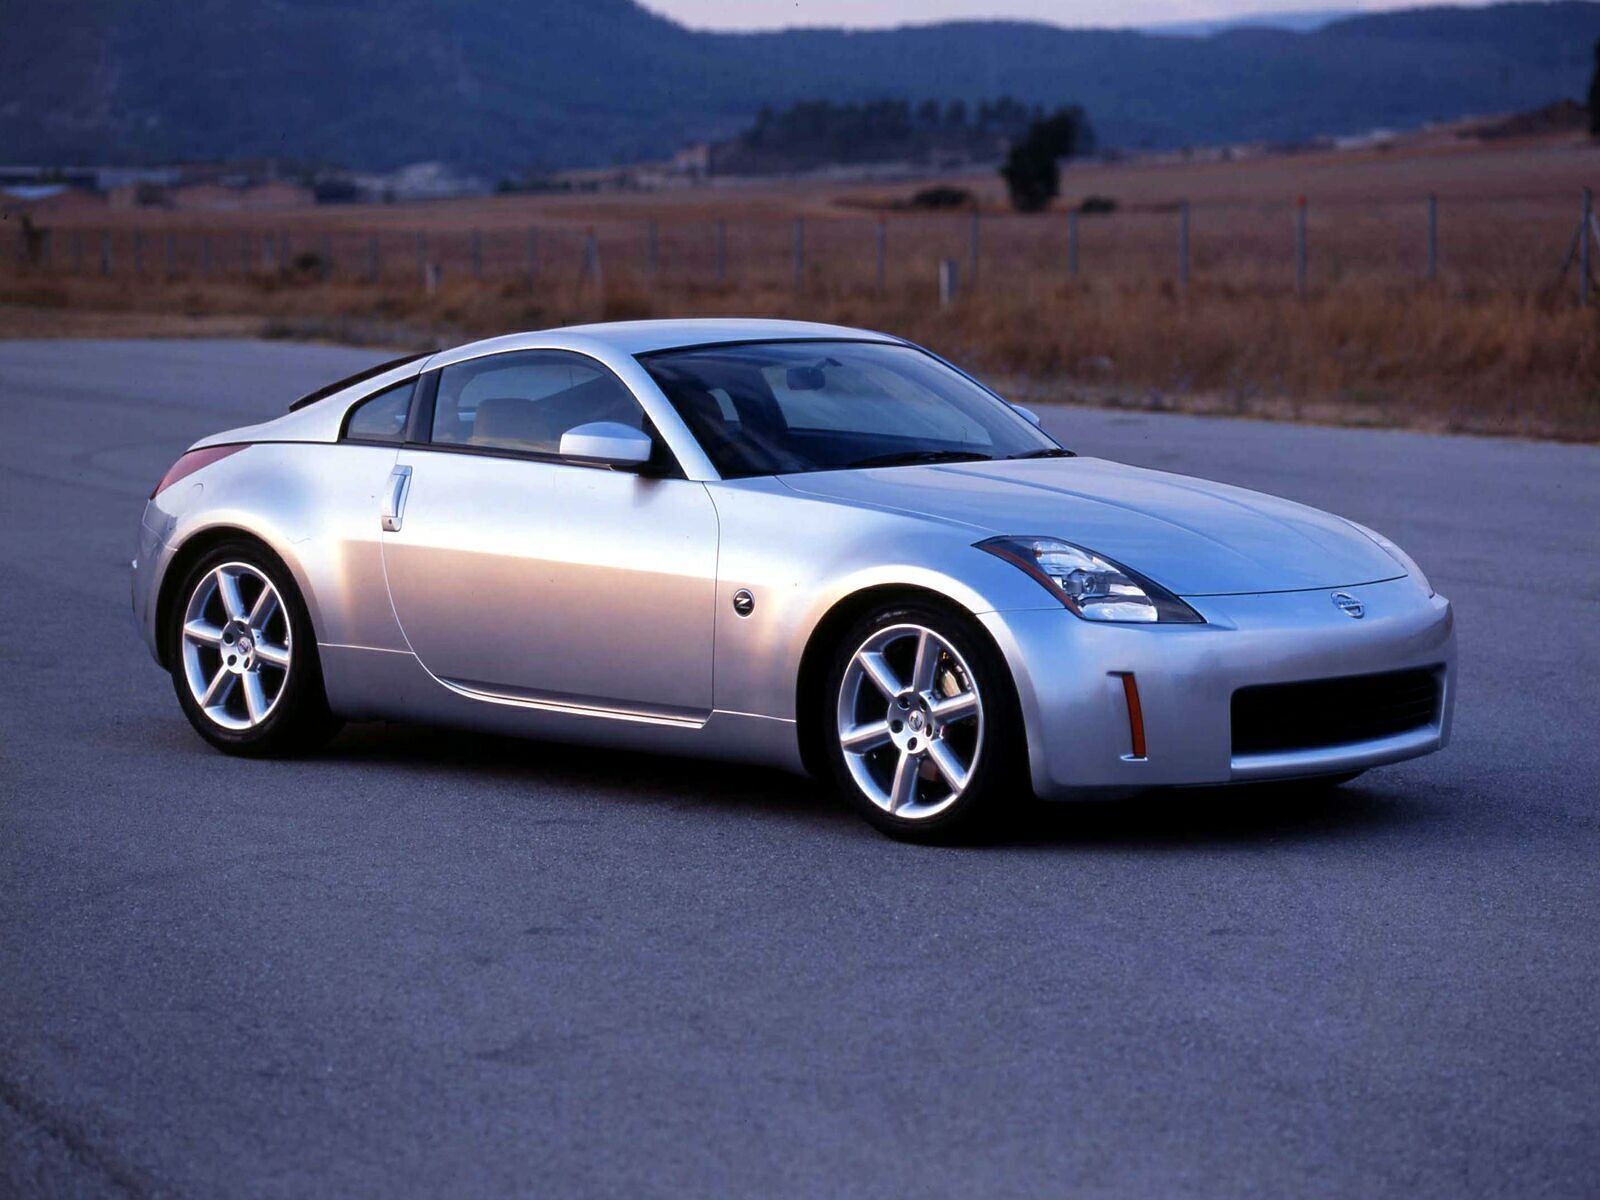 A Silver Nissan 350Z On The Road